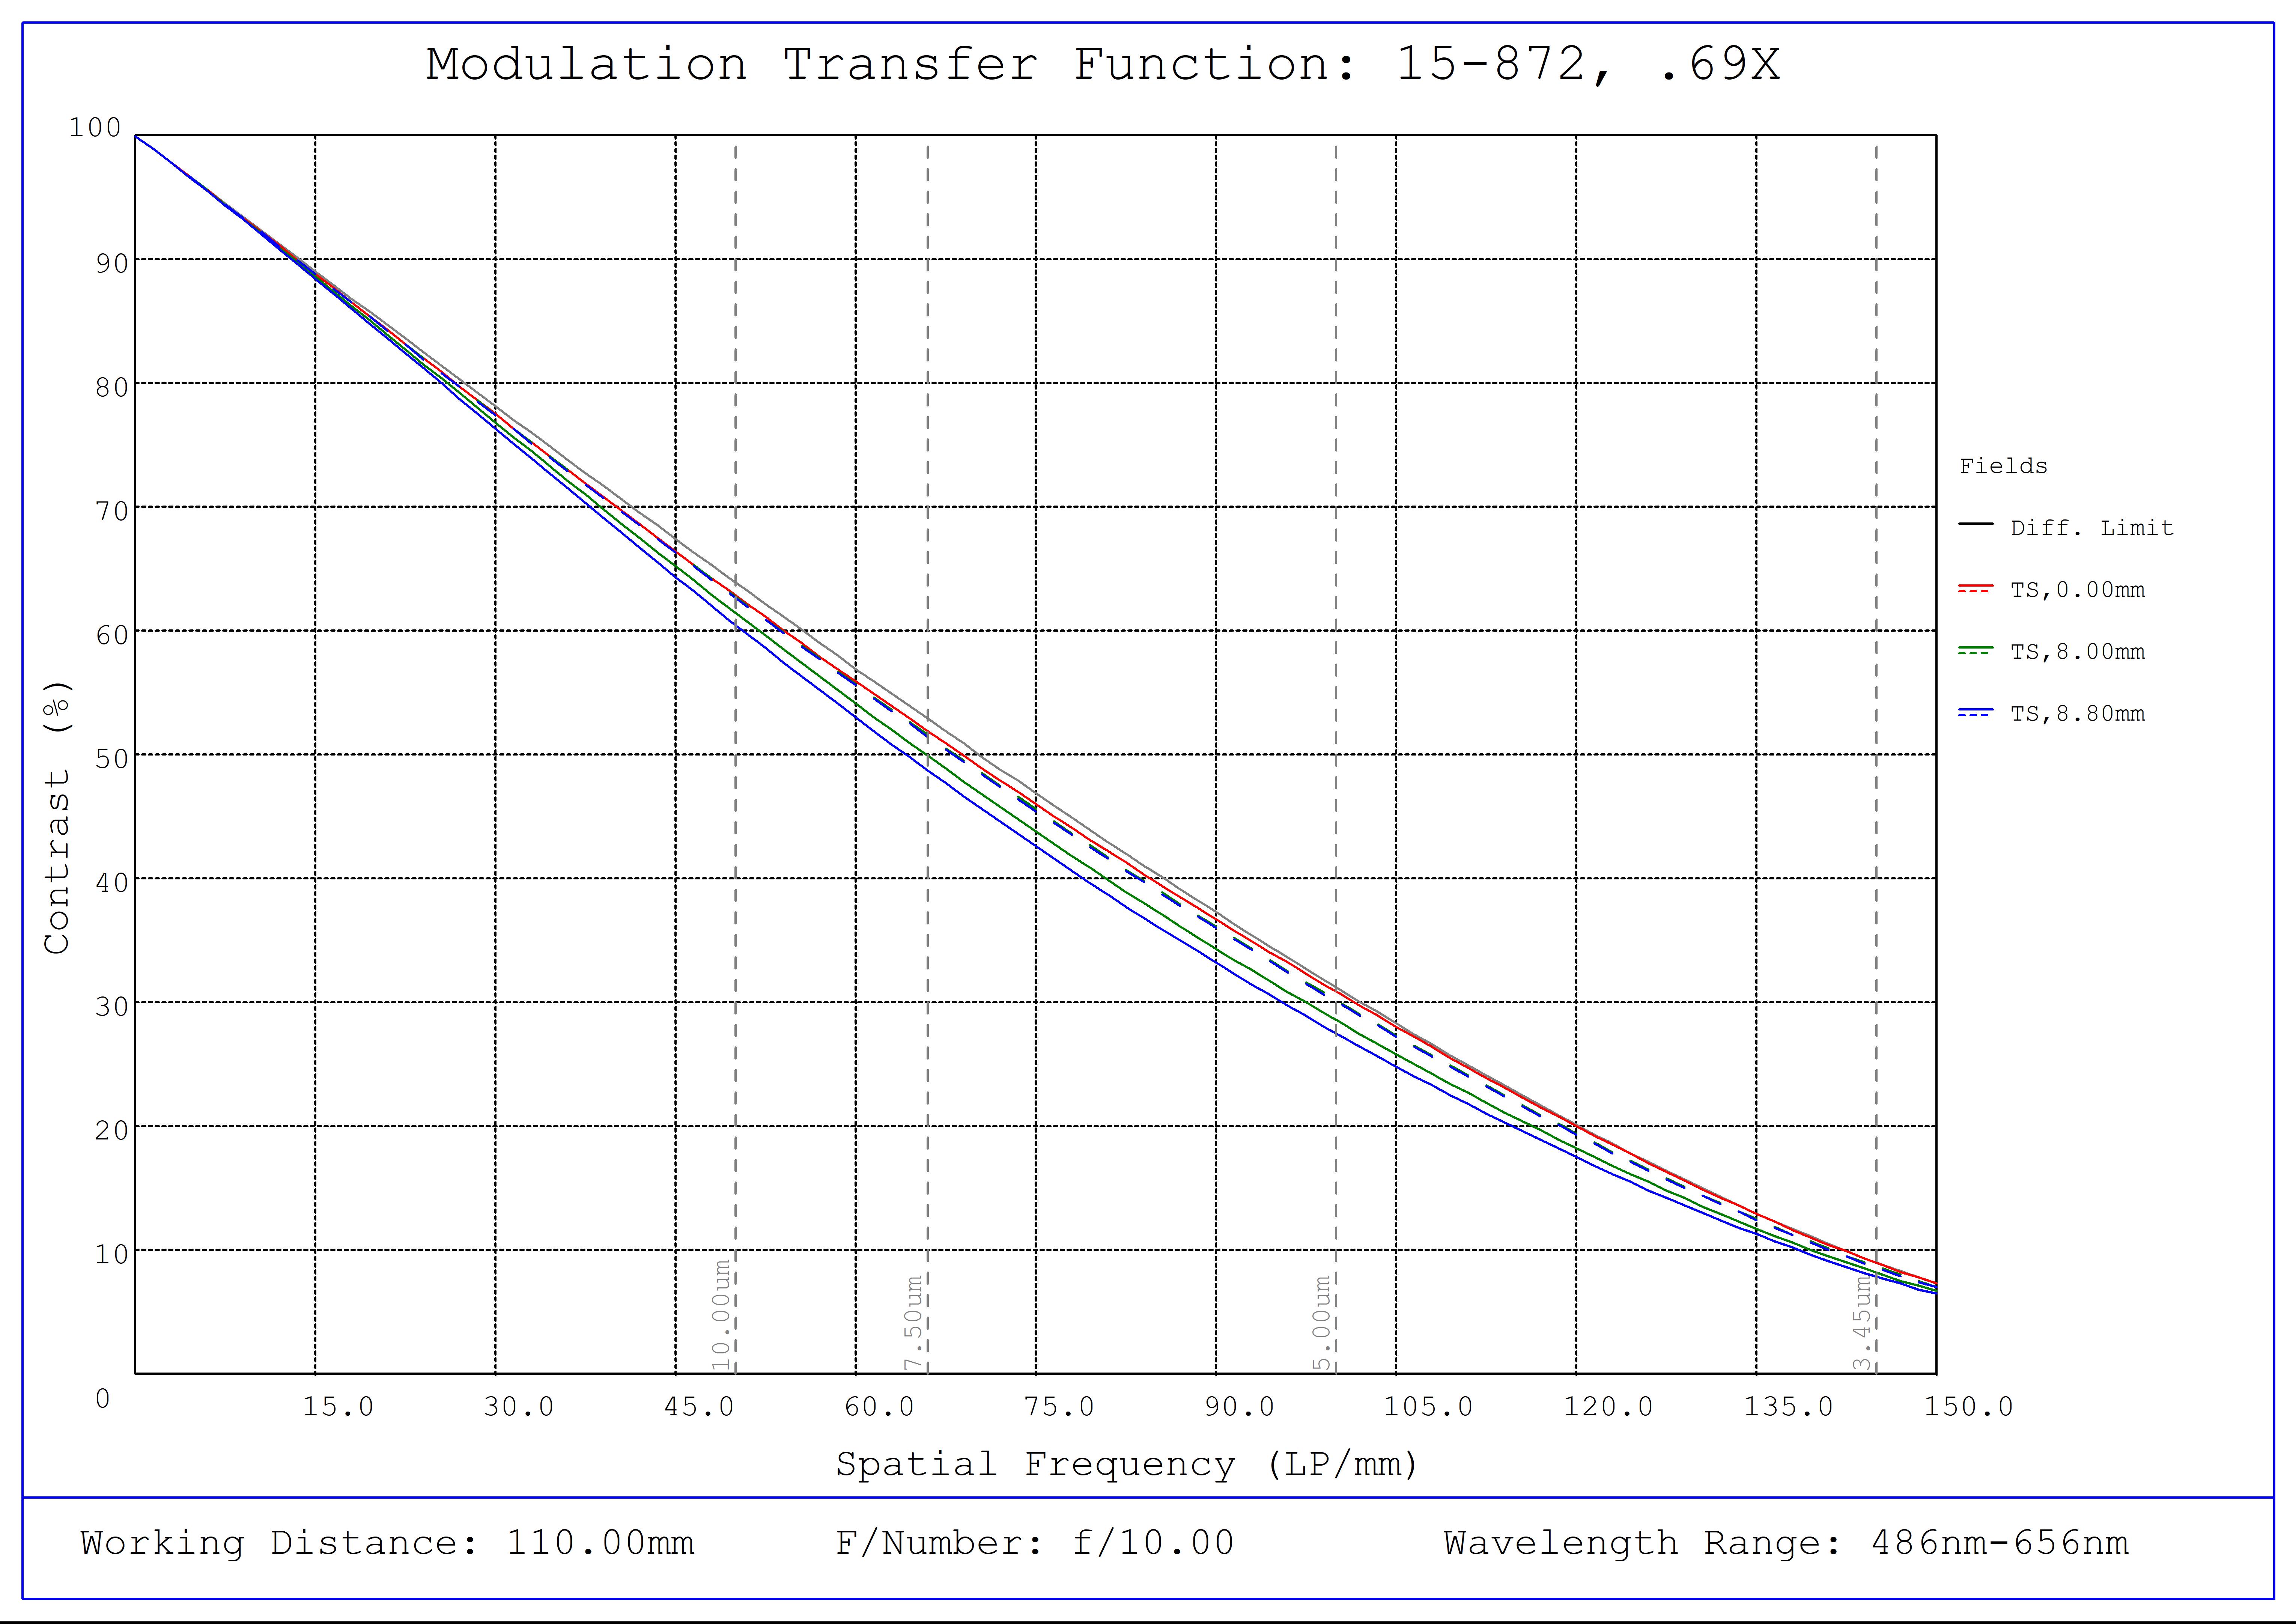 #15-872, 0.69X CobaltTL Telecentric Lens, Modulated Transfer Function (MTF) Plot, 110mm Working Distance, f10